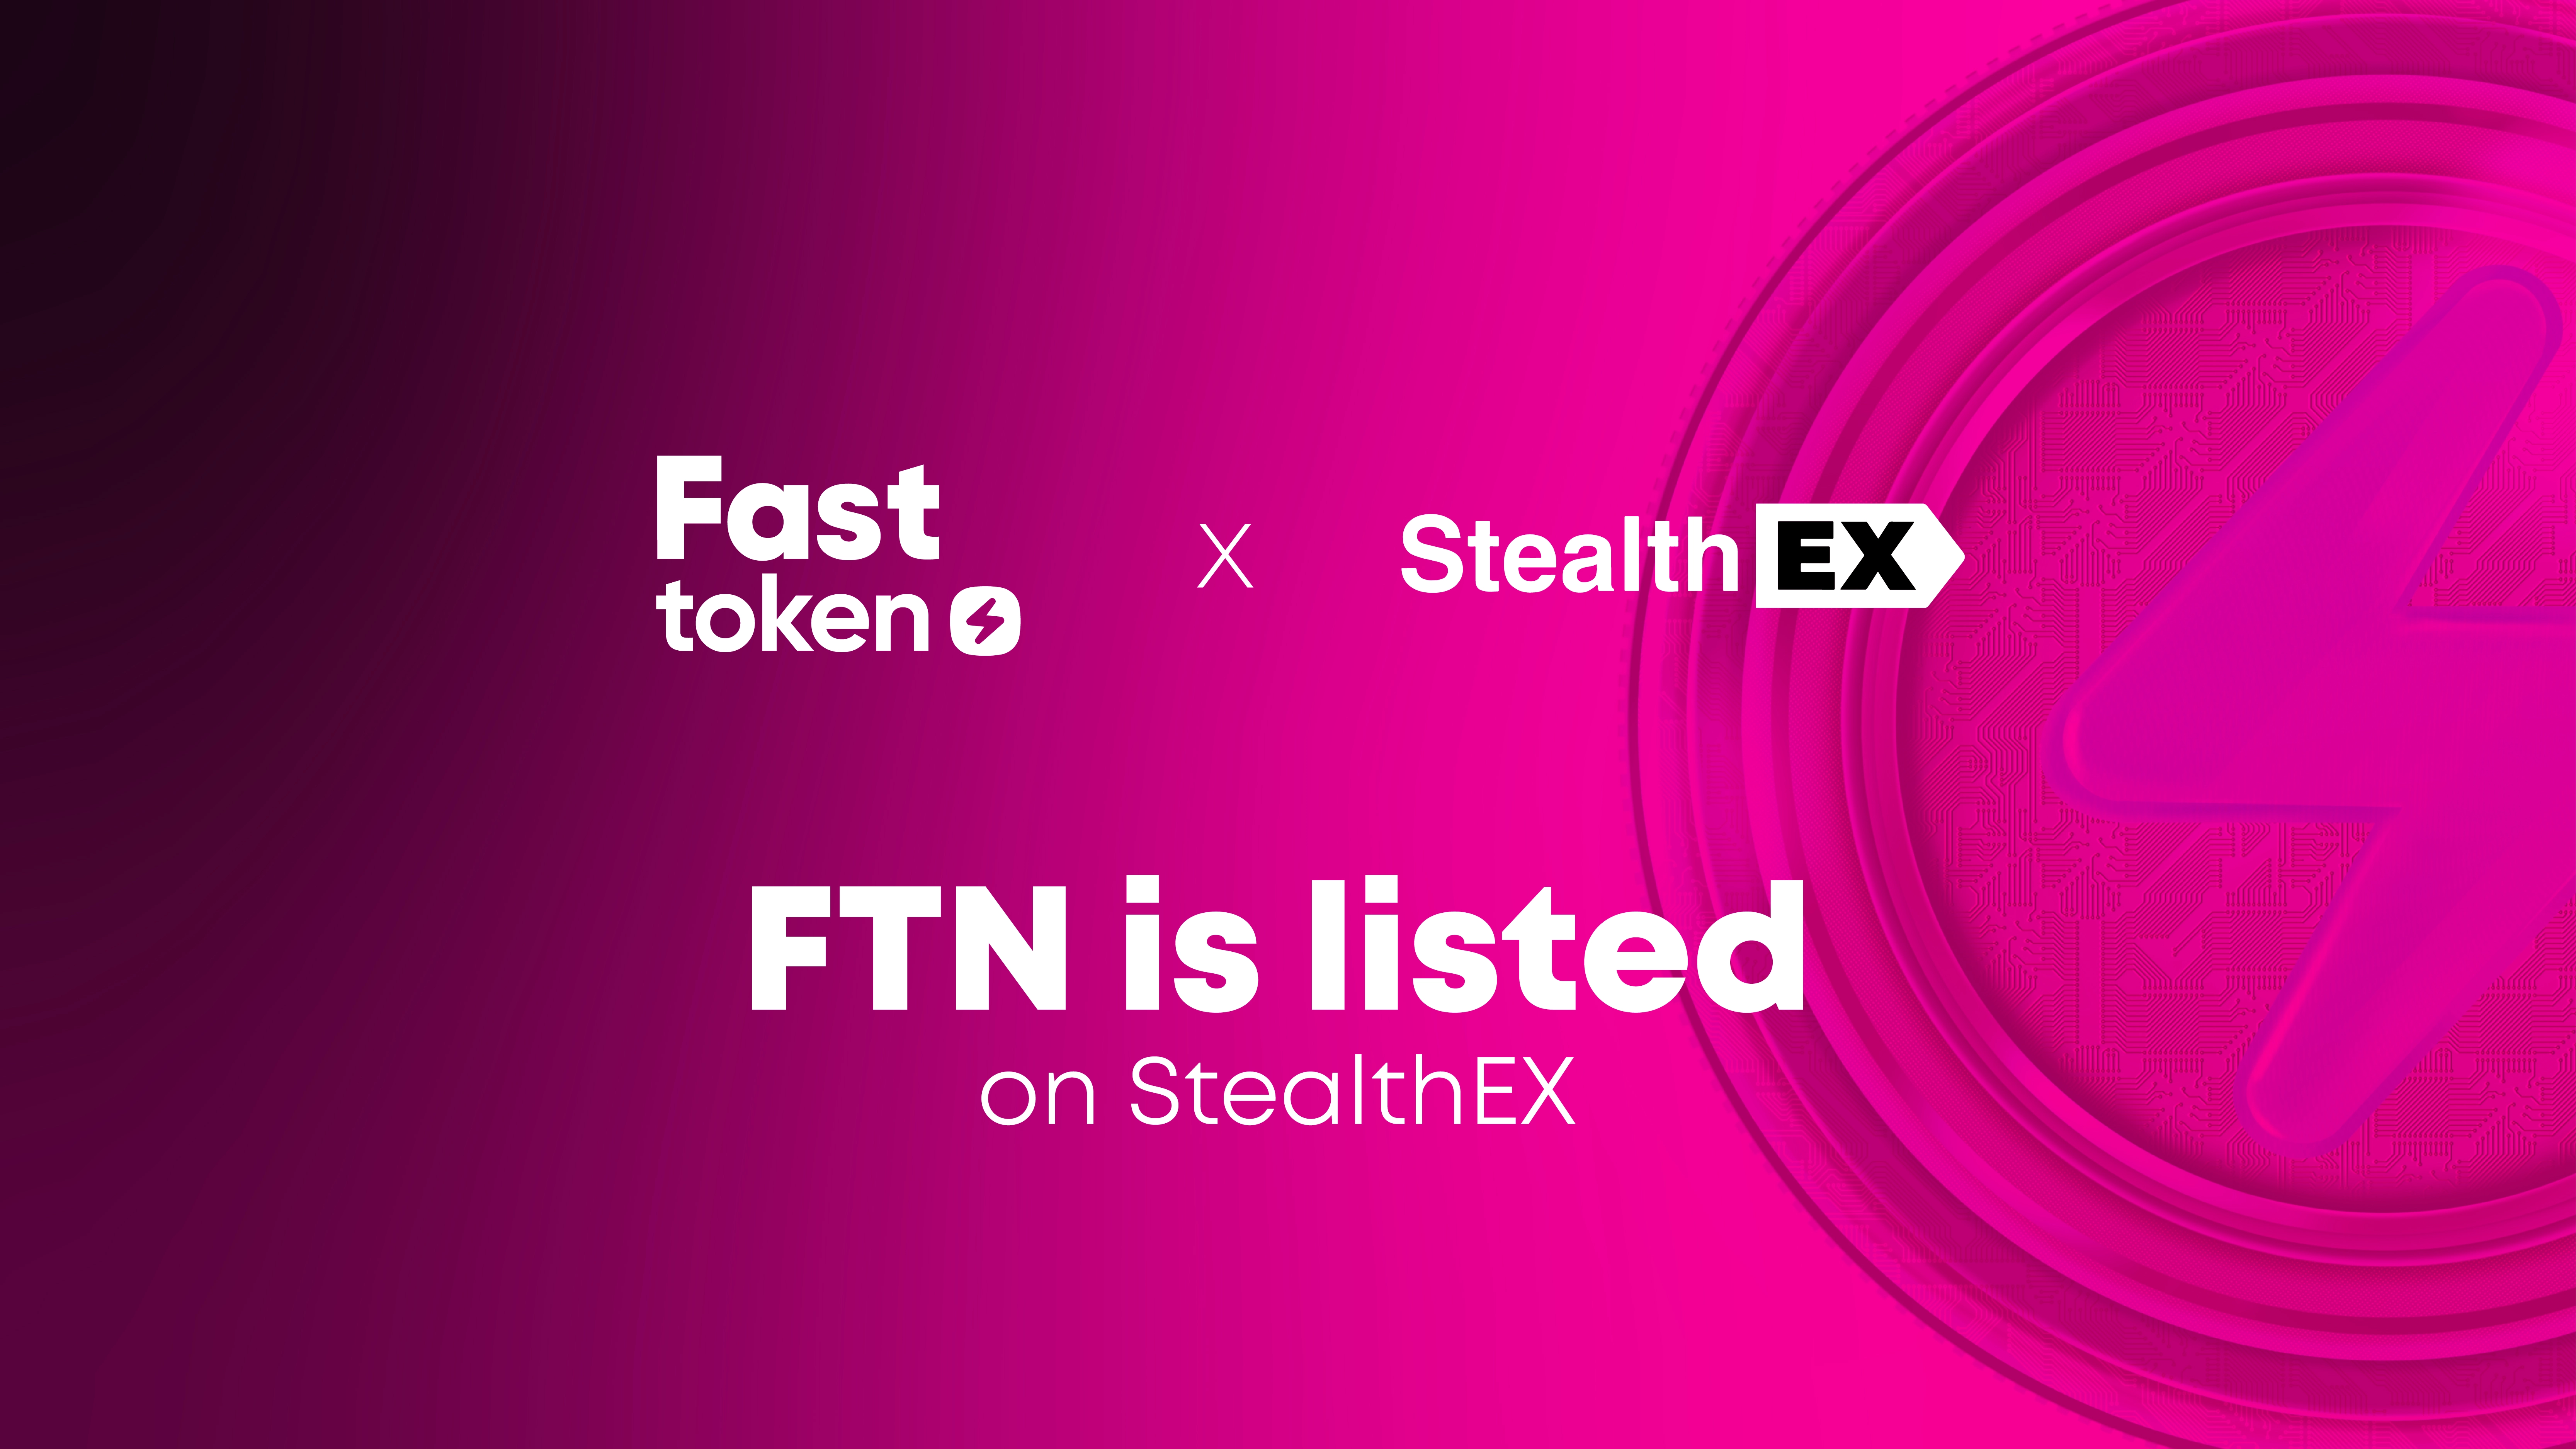 Fasttoken (FTN) Now Listed on StealthEX